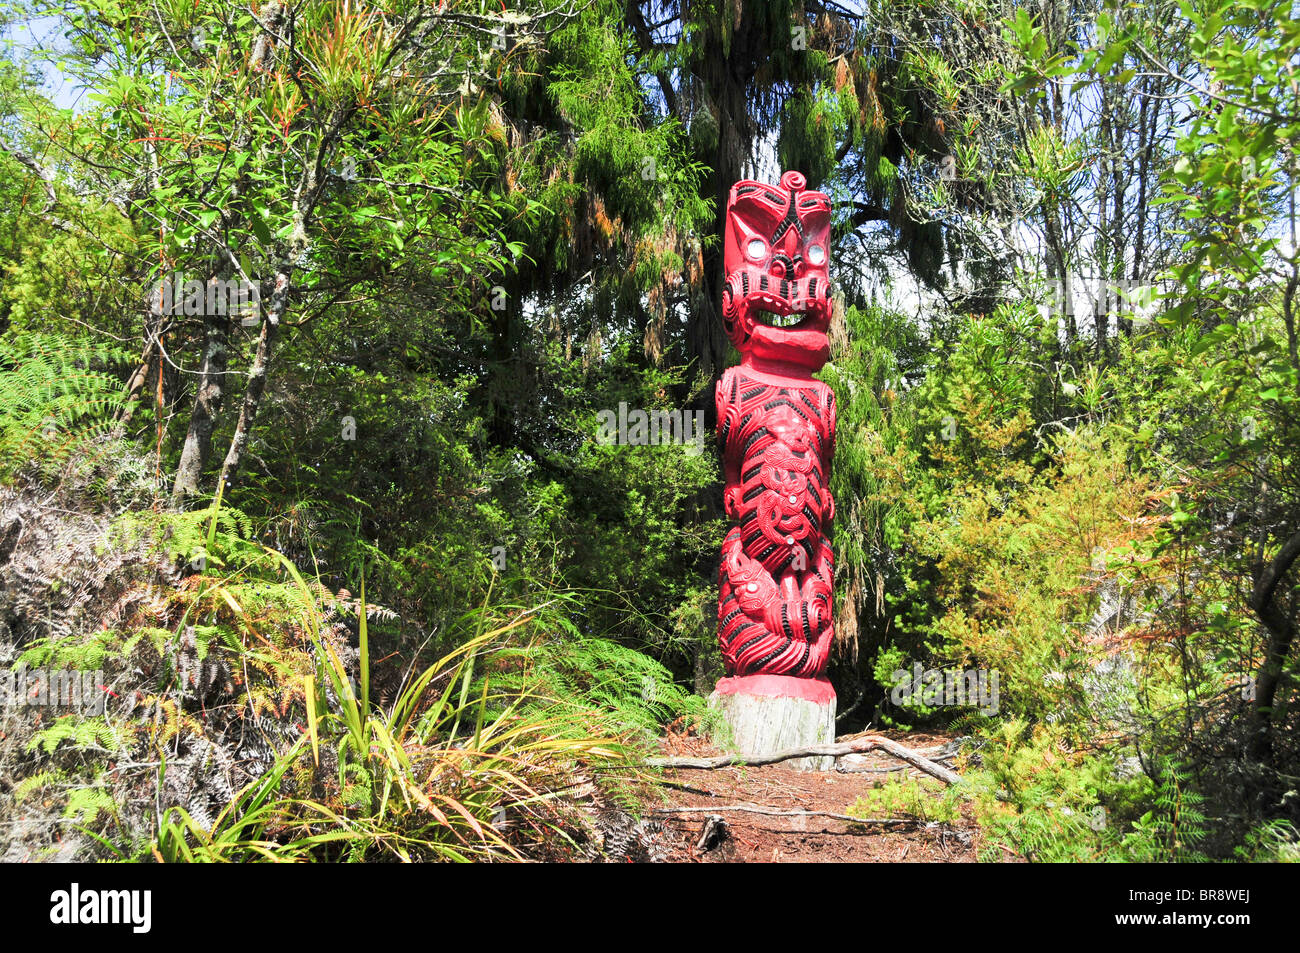 New Zealand, North Island, Rotorua, The Te Puia Geothermal Cultural Experience, Traditional wood carving detail Stock Photo